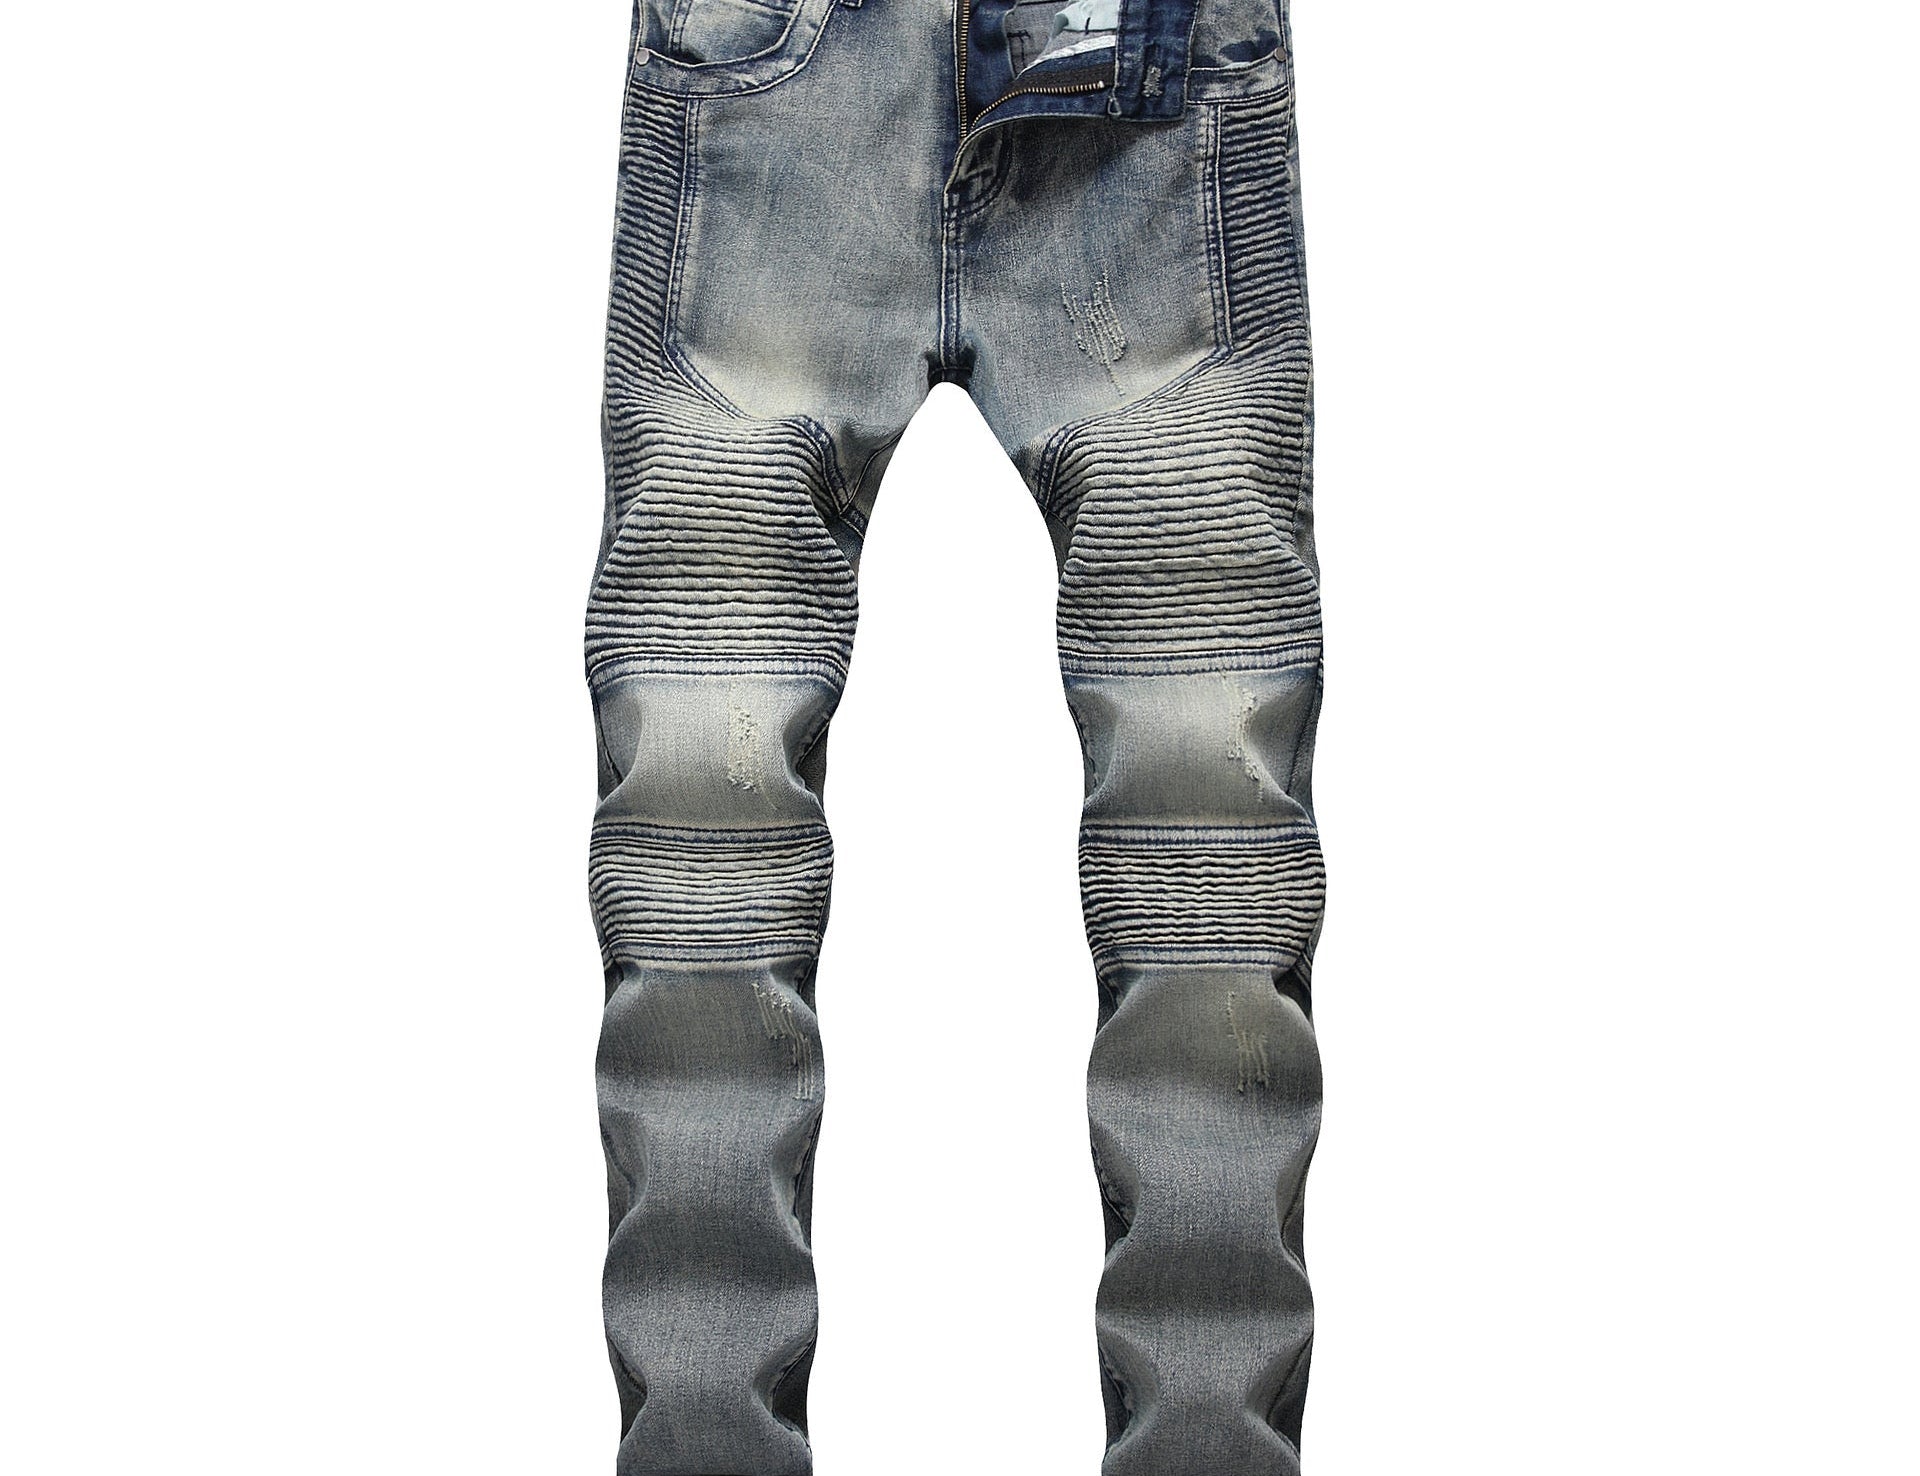 NOOK - Denim Jeans for Men - Sarman Fashion - Wholesale Clothing Fashion Brand for Men from Canada